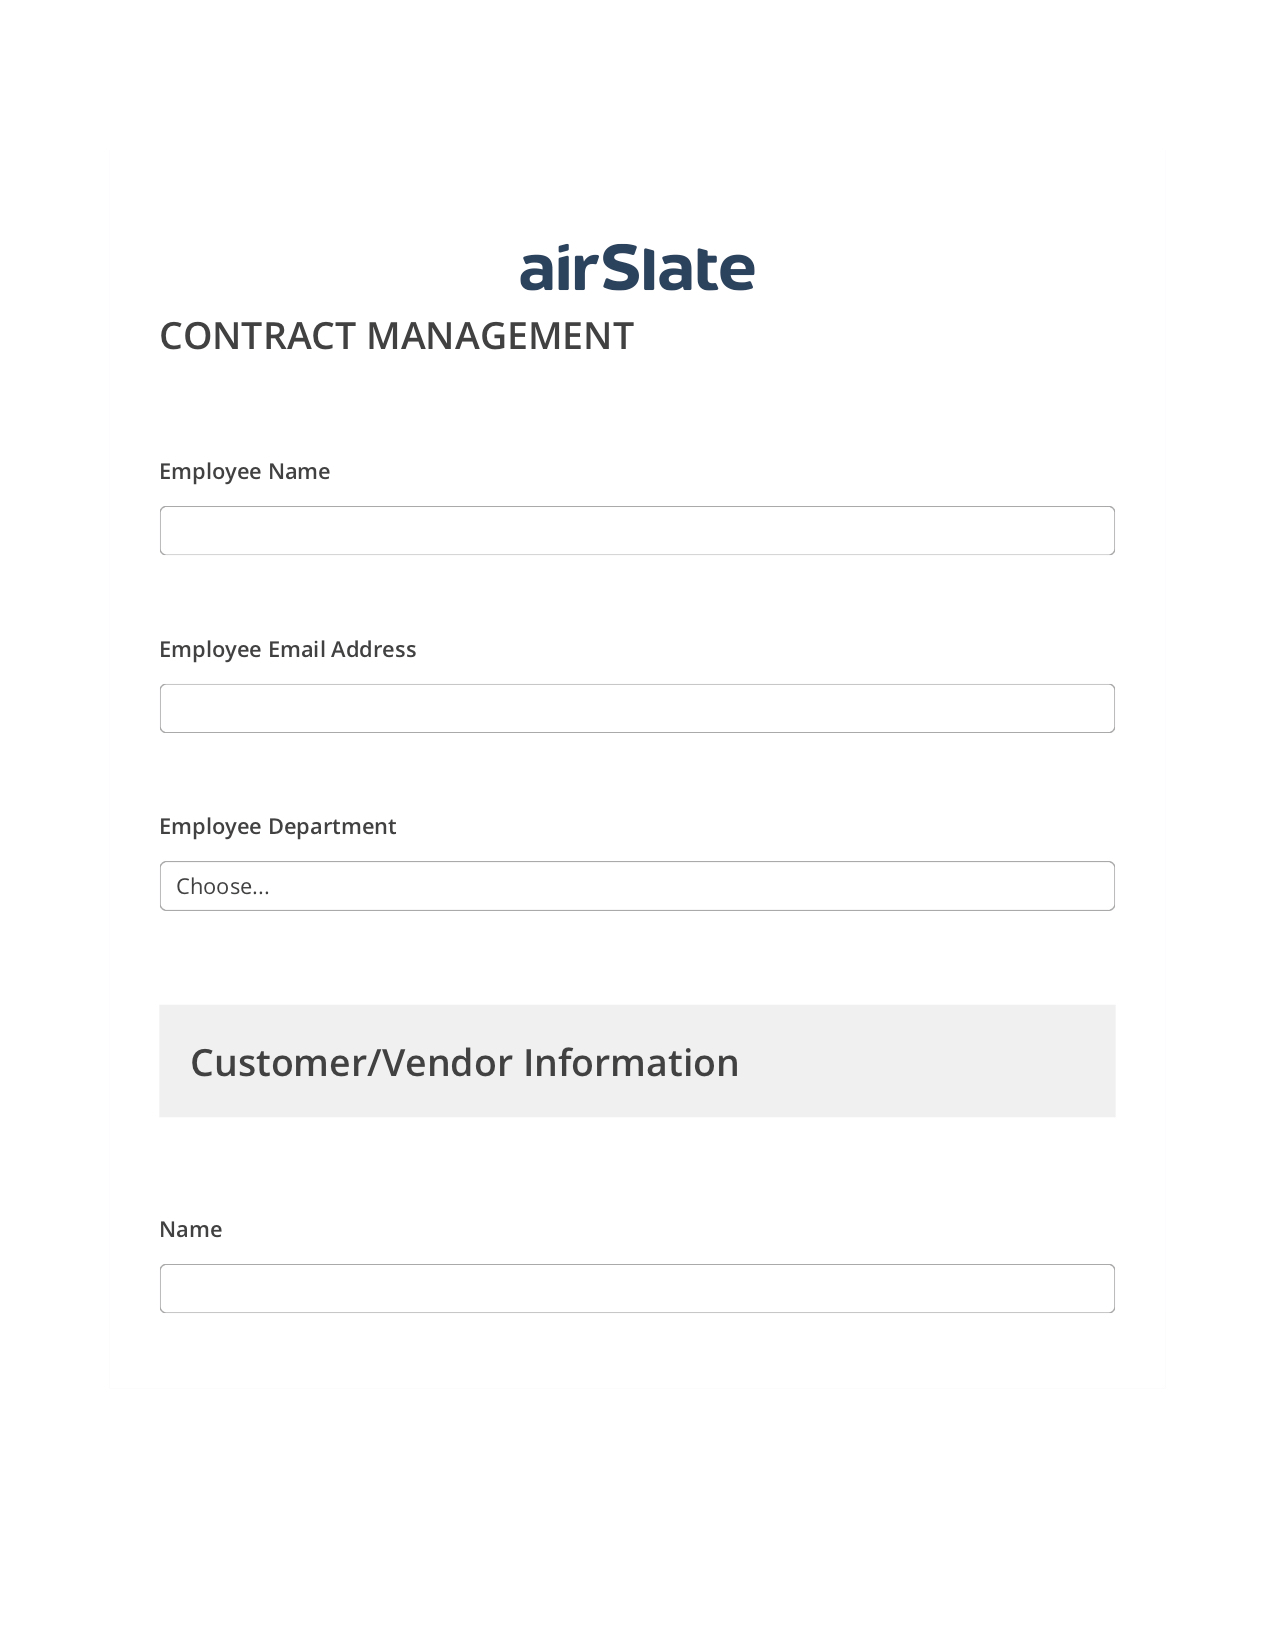 Contract Management Workflow Pre-fill Slate from MS Dynamics 365 record, Remove Slate Bot, Export to Salesforce Bot